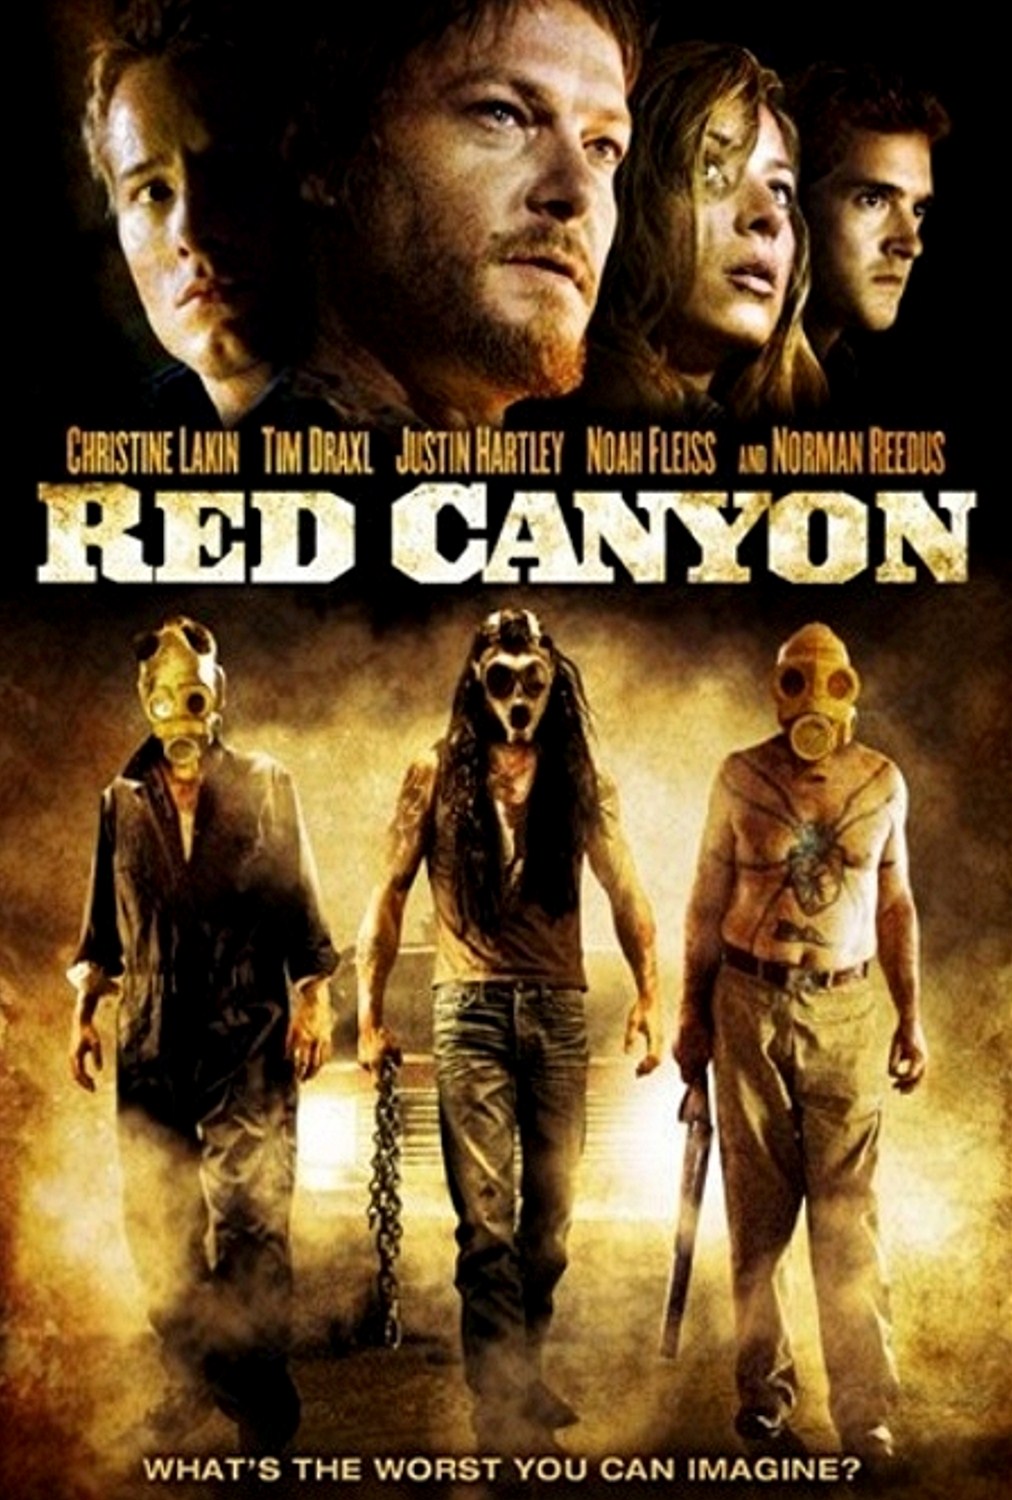 Red Canyon movie